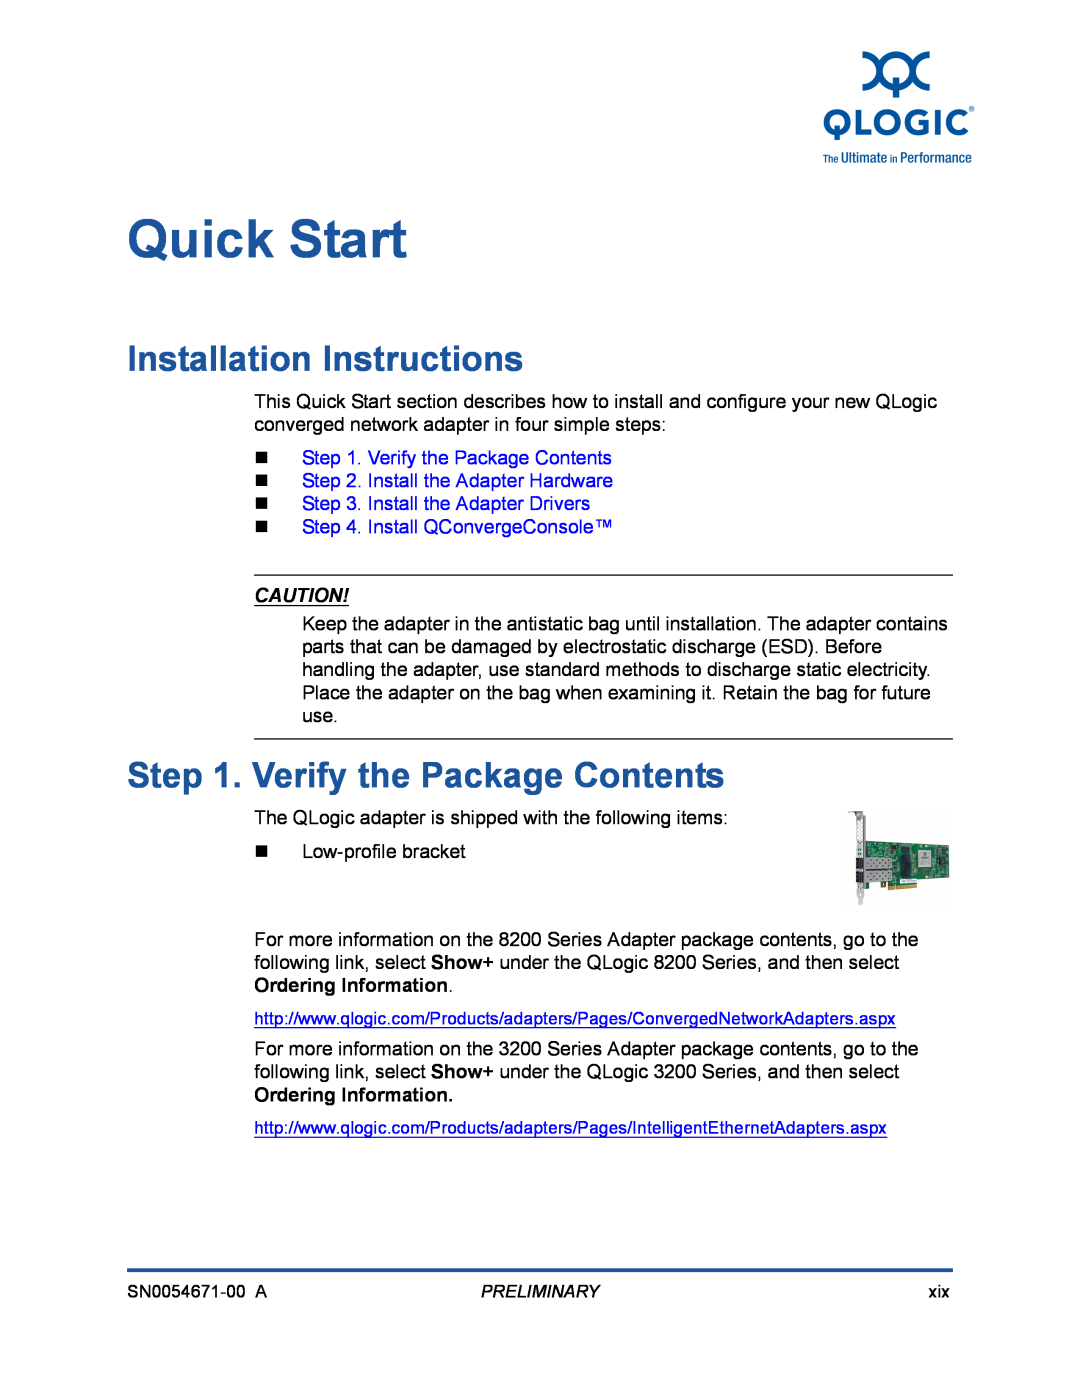 Q-Logic 3200 Quick Start, Installation Instructions,  . Verify the Package Contents,  . Install the Adapter Hardware 